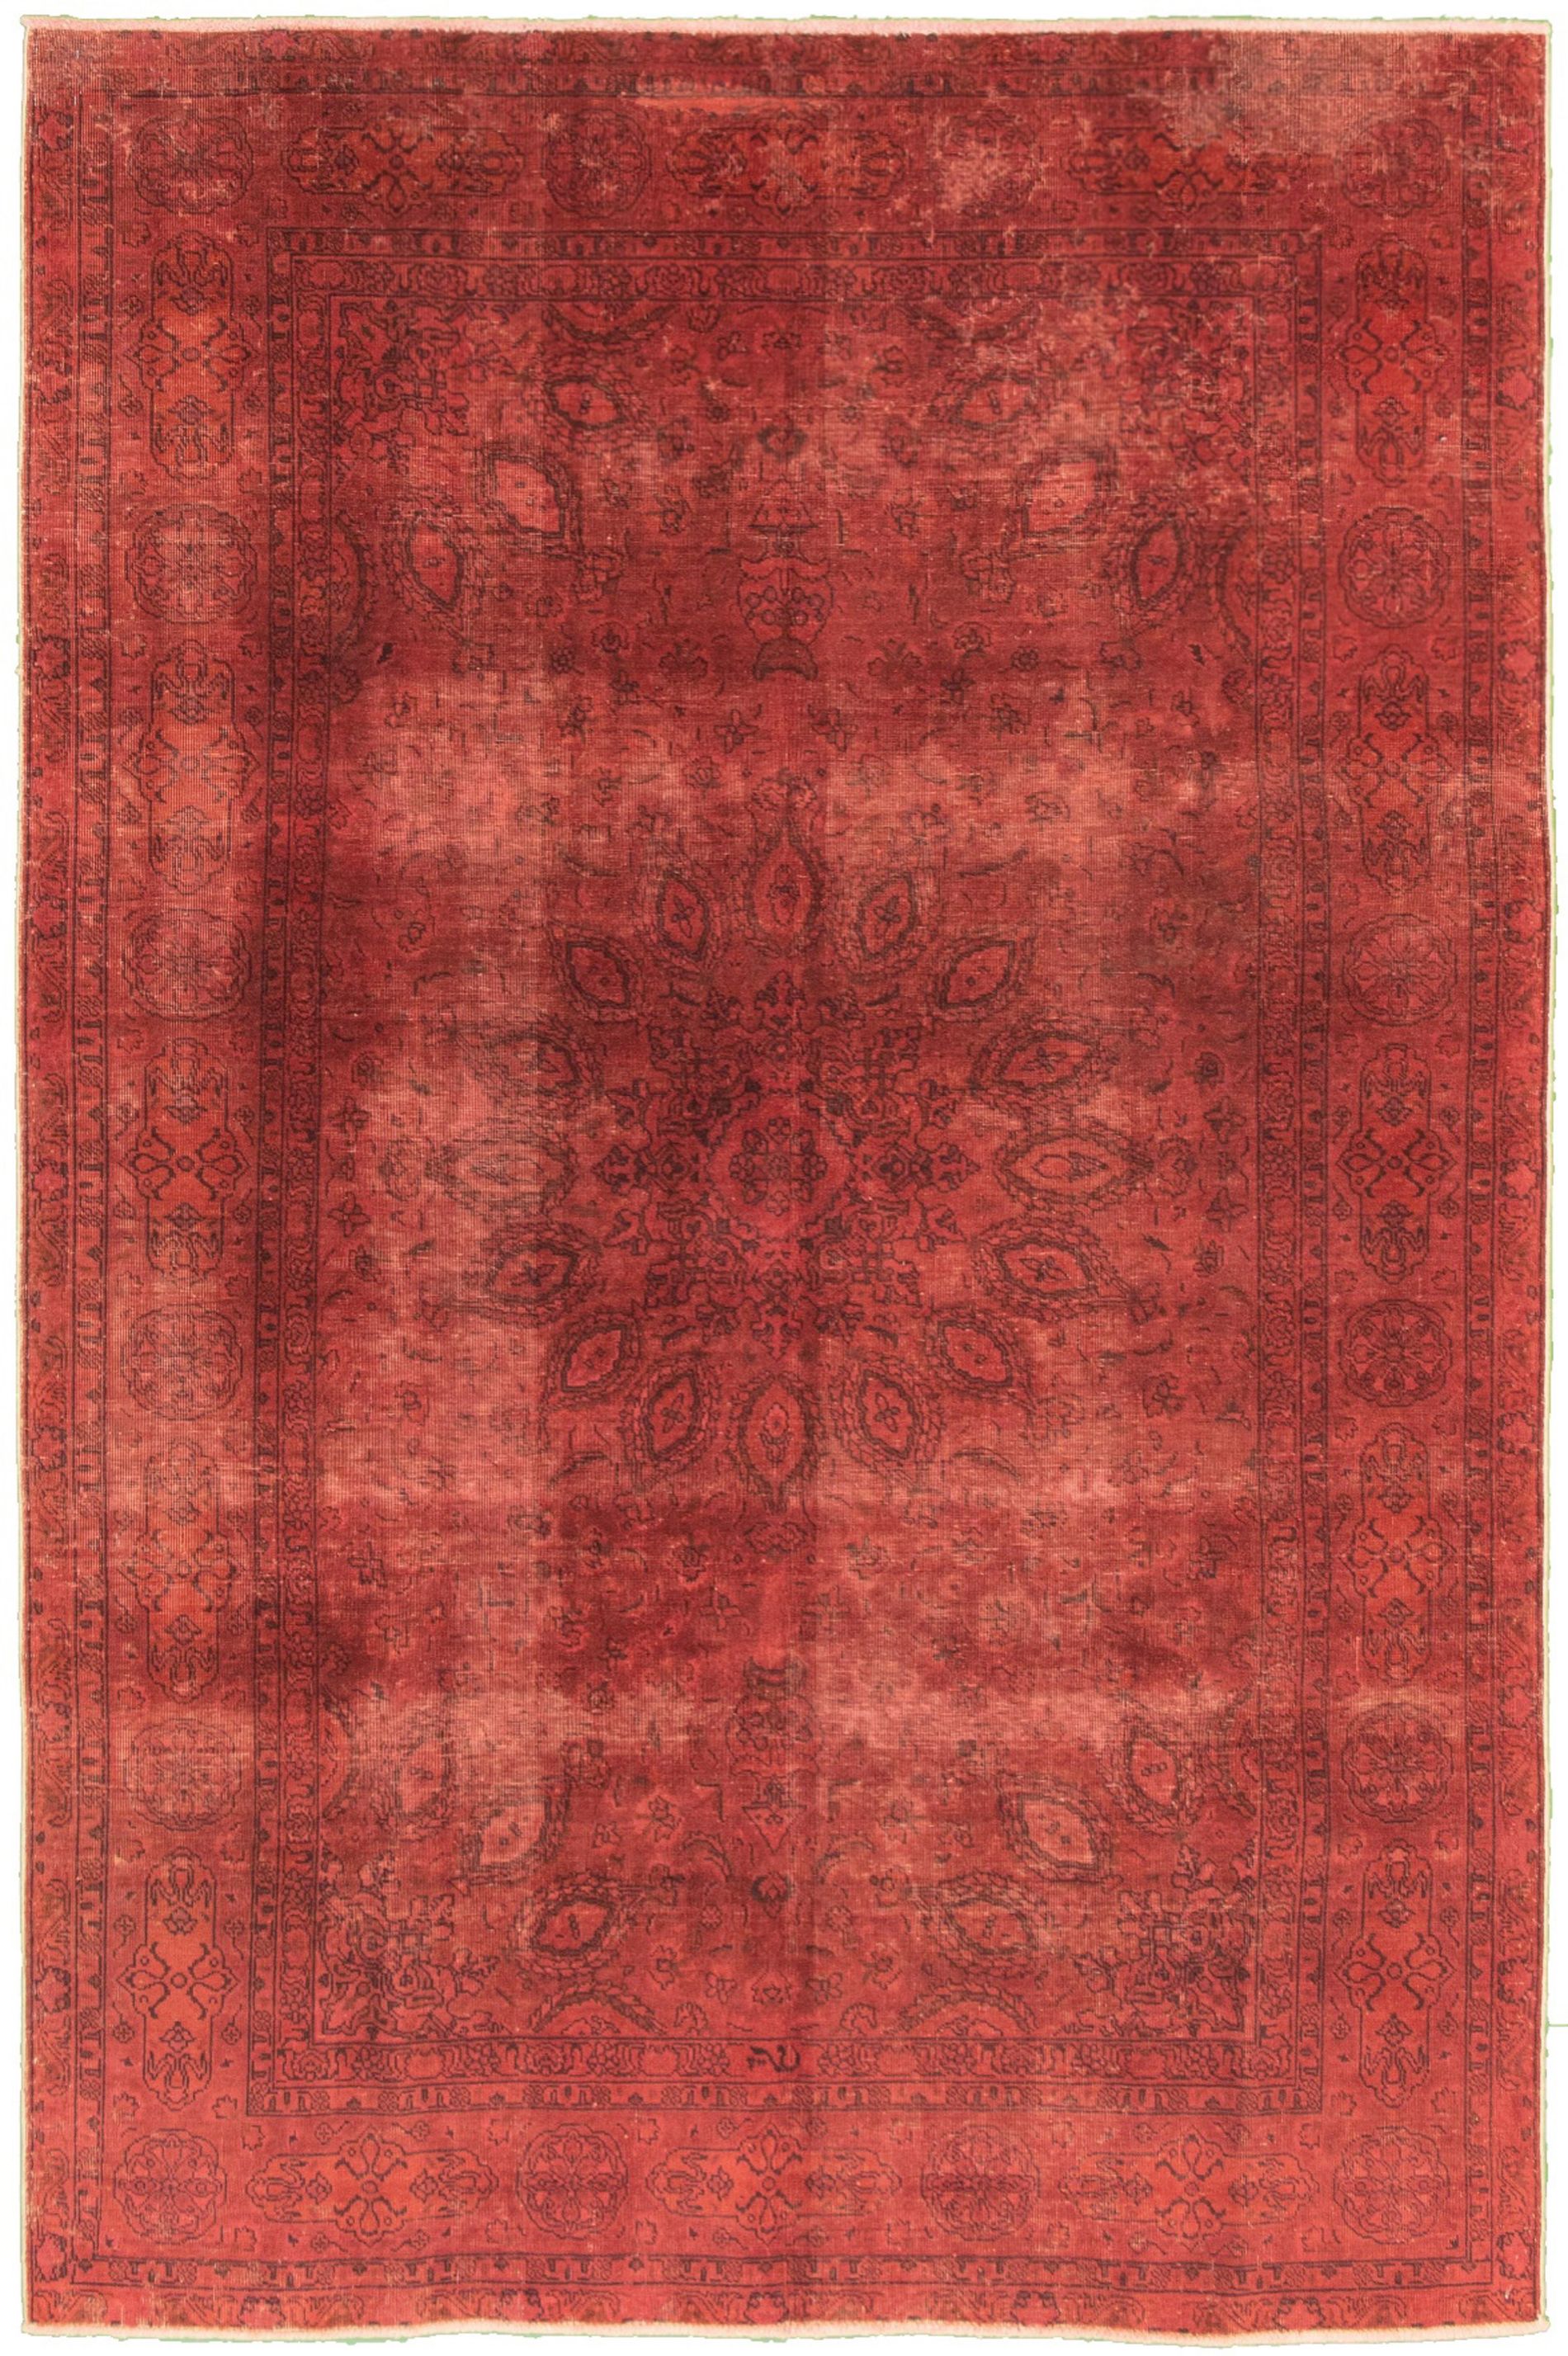 Hand-knotted Color Transition Maroon Wool Rug 6'4" x 9'5" Size: 6'4" x 9'5"  